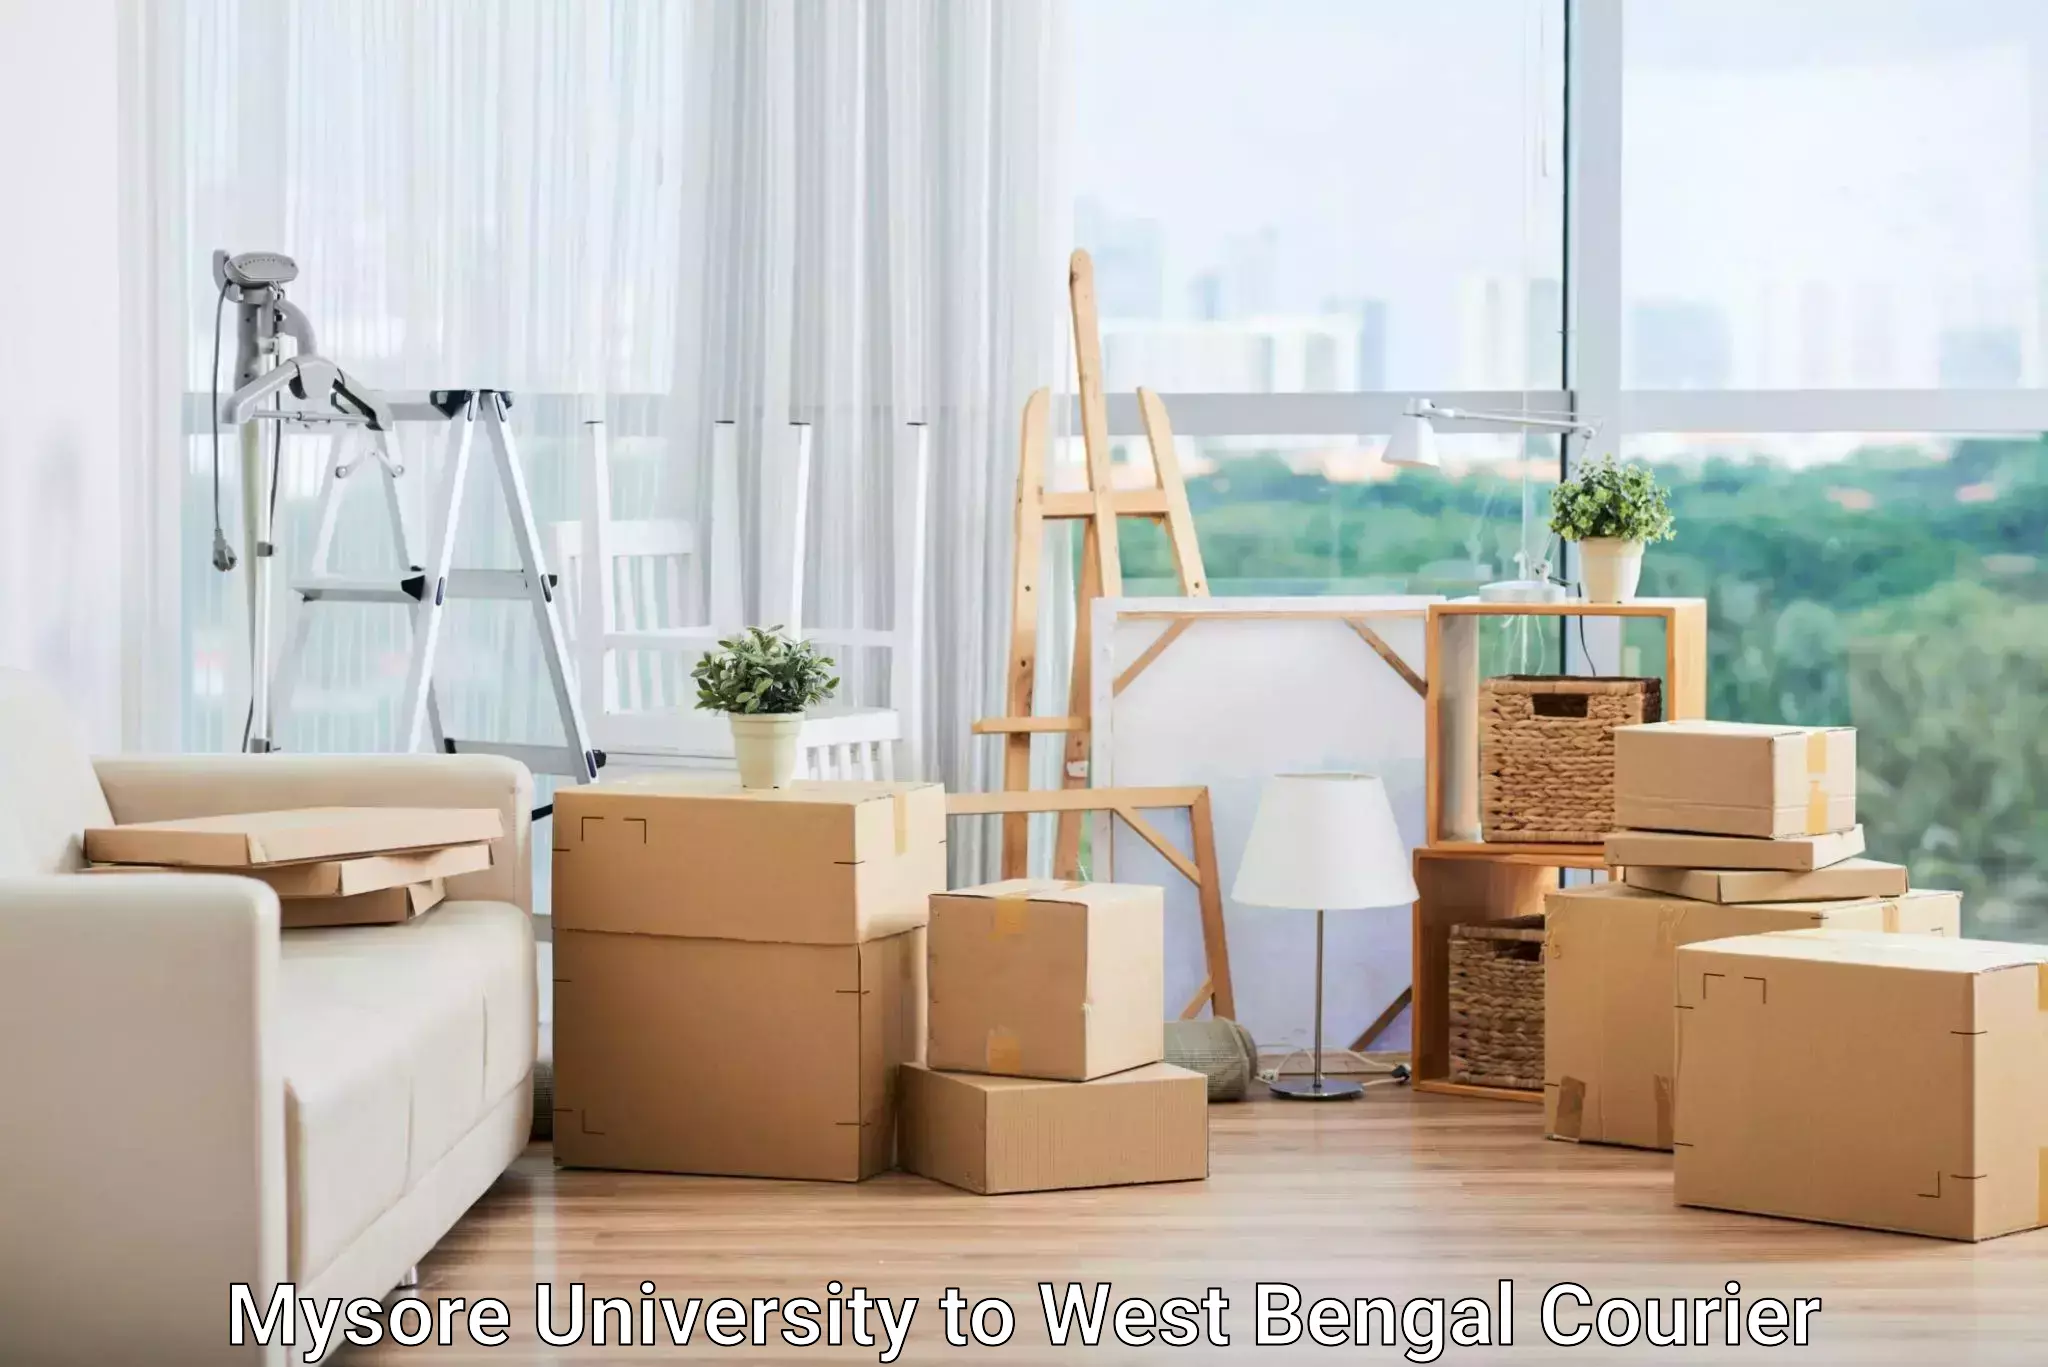 Full-service courier options Mysore University to West Bengal